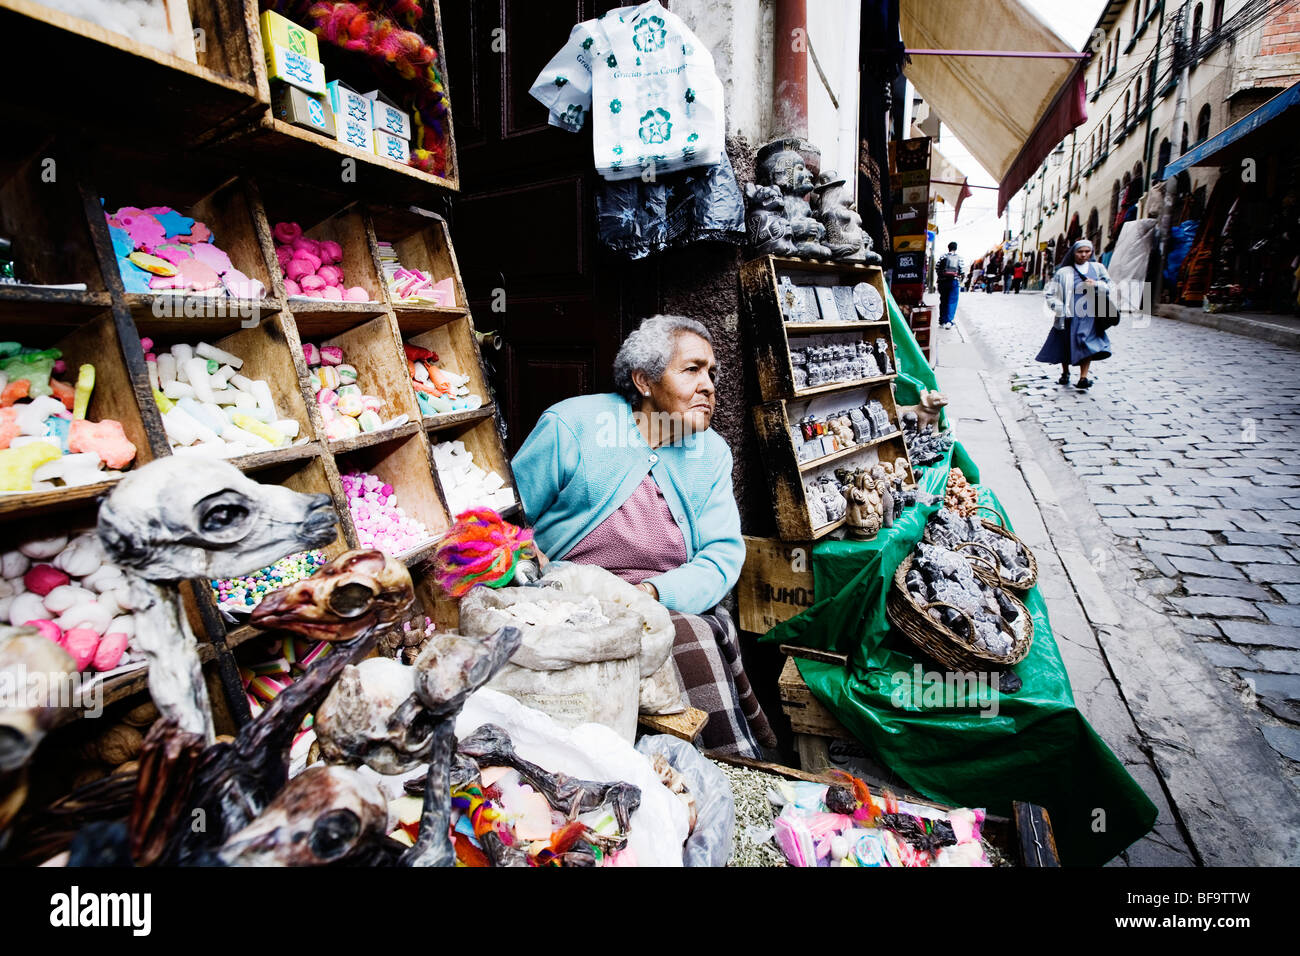 Old lady selling dried llama fetuses and other magical tools at Witch Market, La Paz, Bolivia. Stock Photo